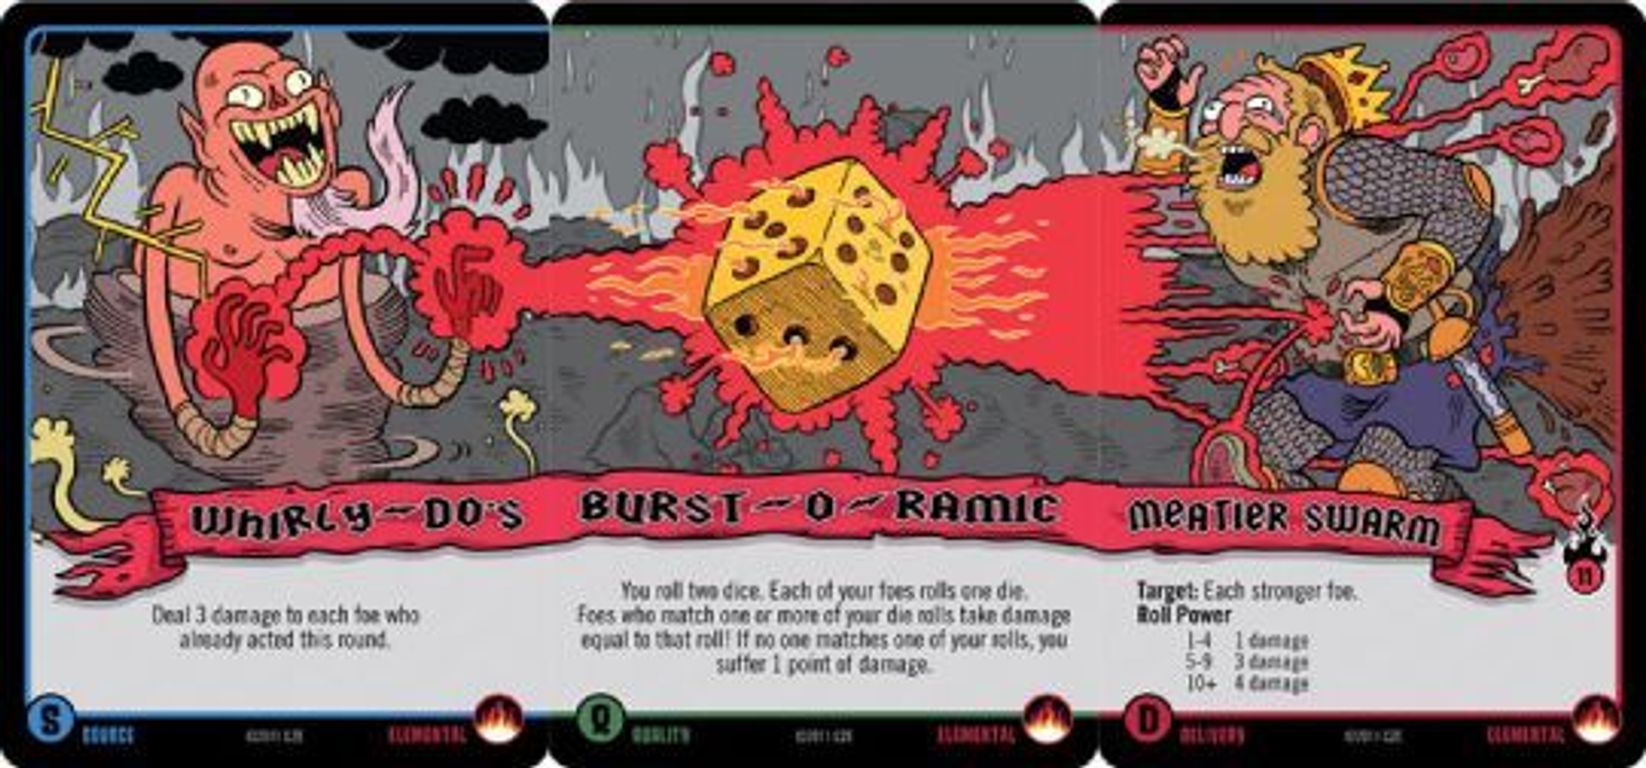 Epic Spell Wars of the Battle Wizards: Duel at Mt. Skullzfyre carte